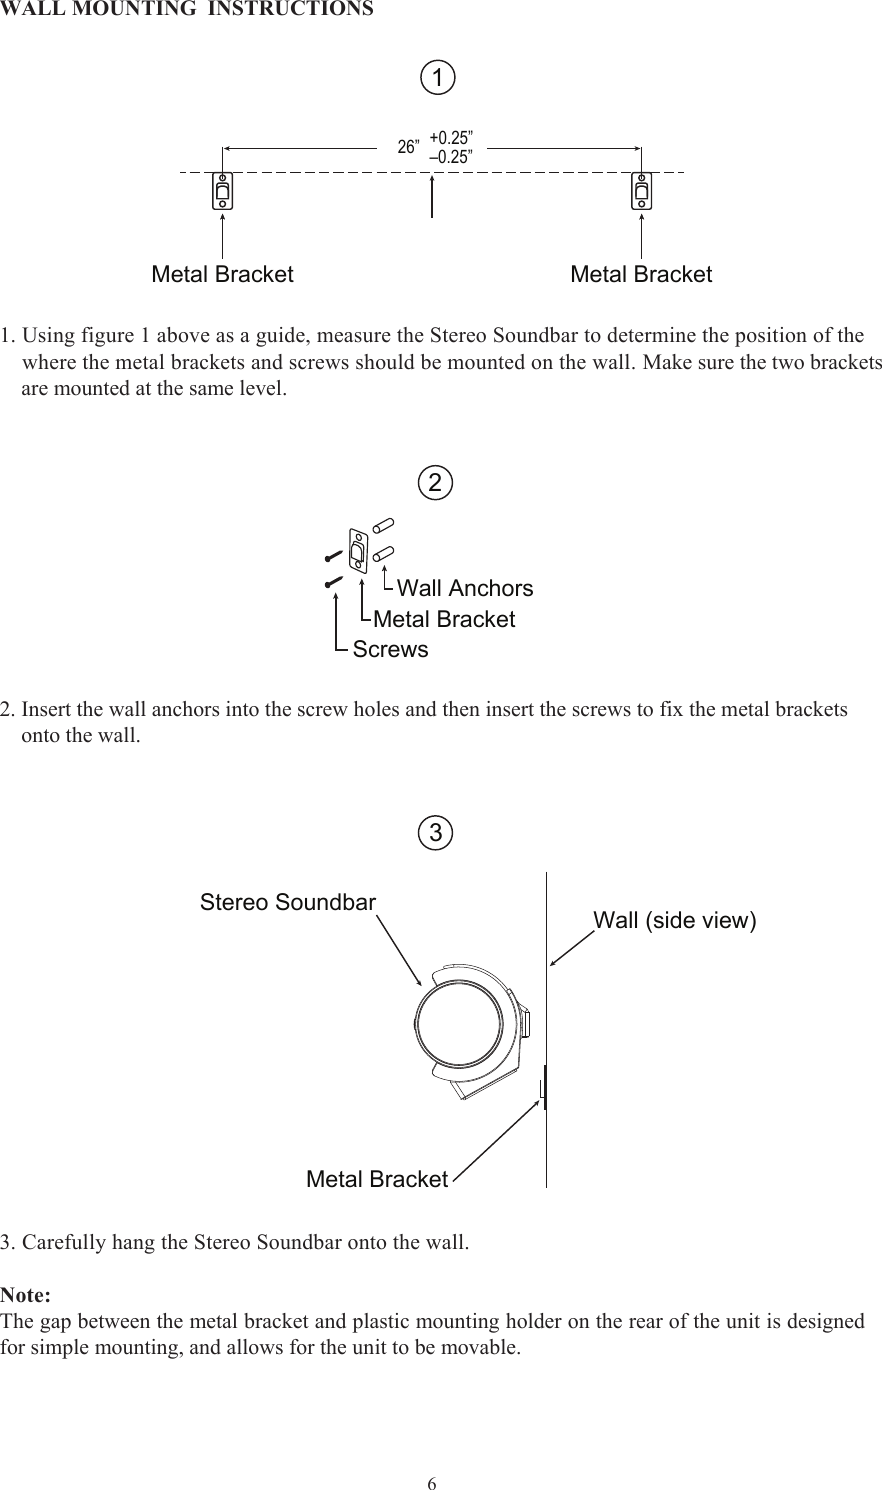  6WALL MOUNTING  INSTRUCTIONS 1. Using figure 1 above as a guide, measure the Stereo Soundbar to determine the position of the    where the metal brackets and screws should be mounted on the wall. Make sure the two brackets    are mounted at the same level. Metal Bracket Metal Bracket26” +0.25”–0.25”12Wall AnchorsMetal BracketScrews2. Insert the wall anchors into the screw holes and then insert the screws to fix the metal brackets    onto the wall.   3. Carefully hang the Stereo Soundbar onto the wall. Note:The gap between the metal bracket and plastic mounting holder on the rear of the unit is designedfor simple mounting, and allows for the unit to be movable.  3Stereo SoundbarMetal BracketWall (side view)